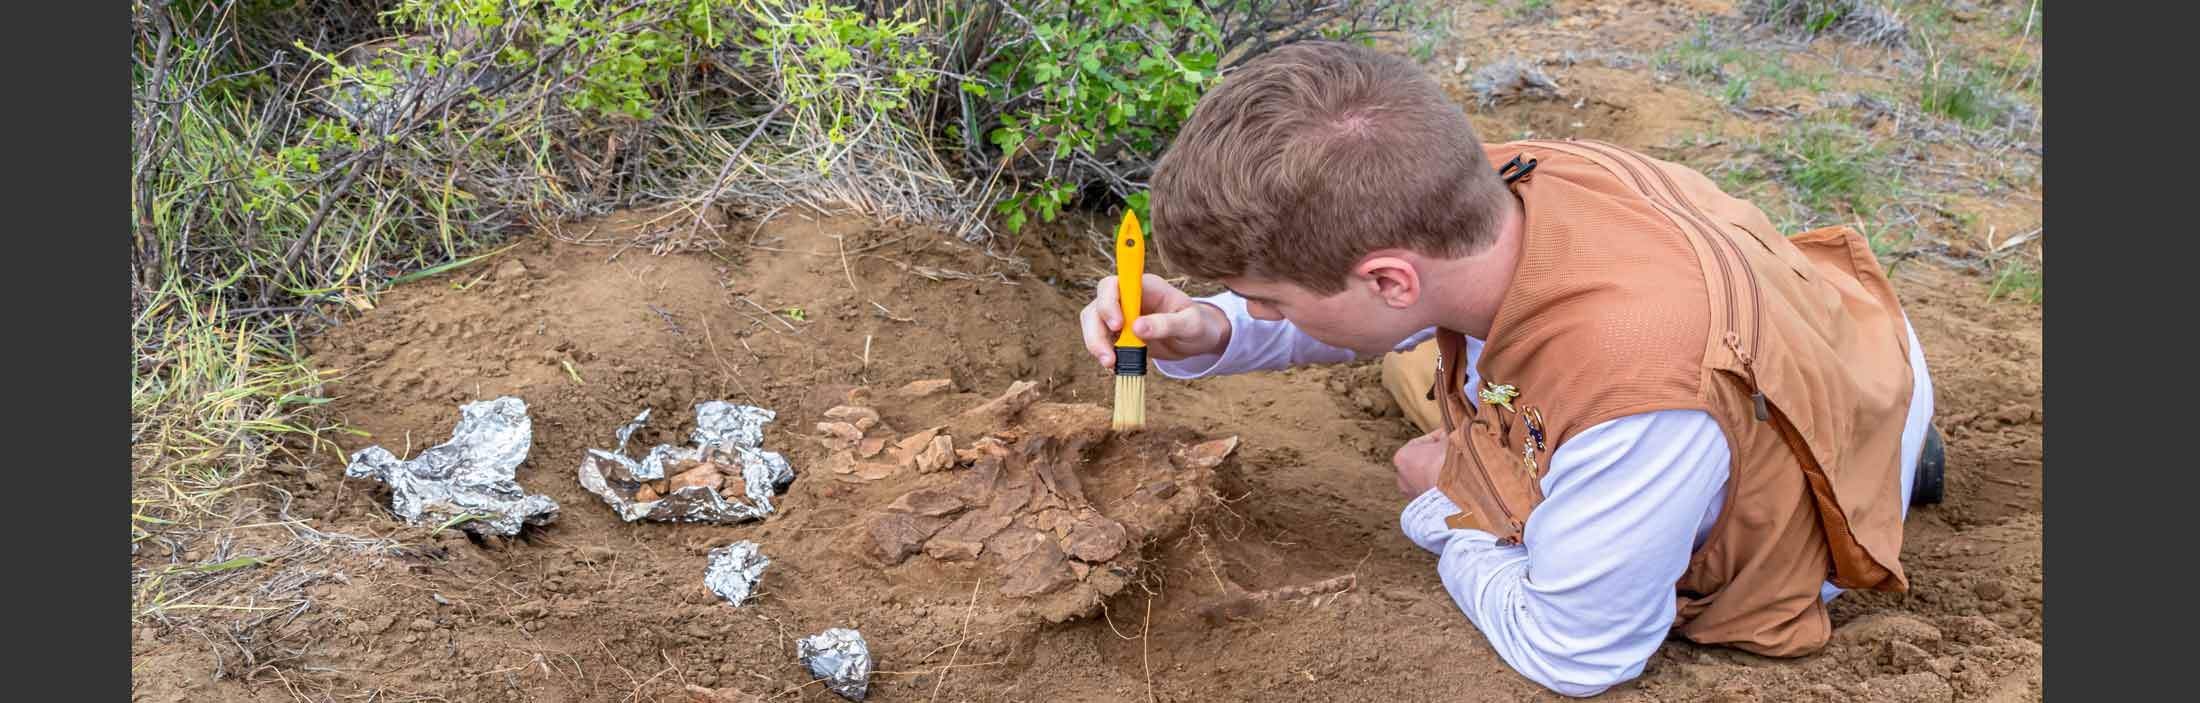 Digging Dinosaurs and Fossils